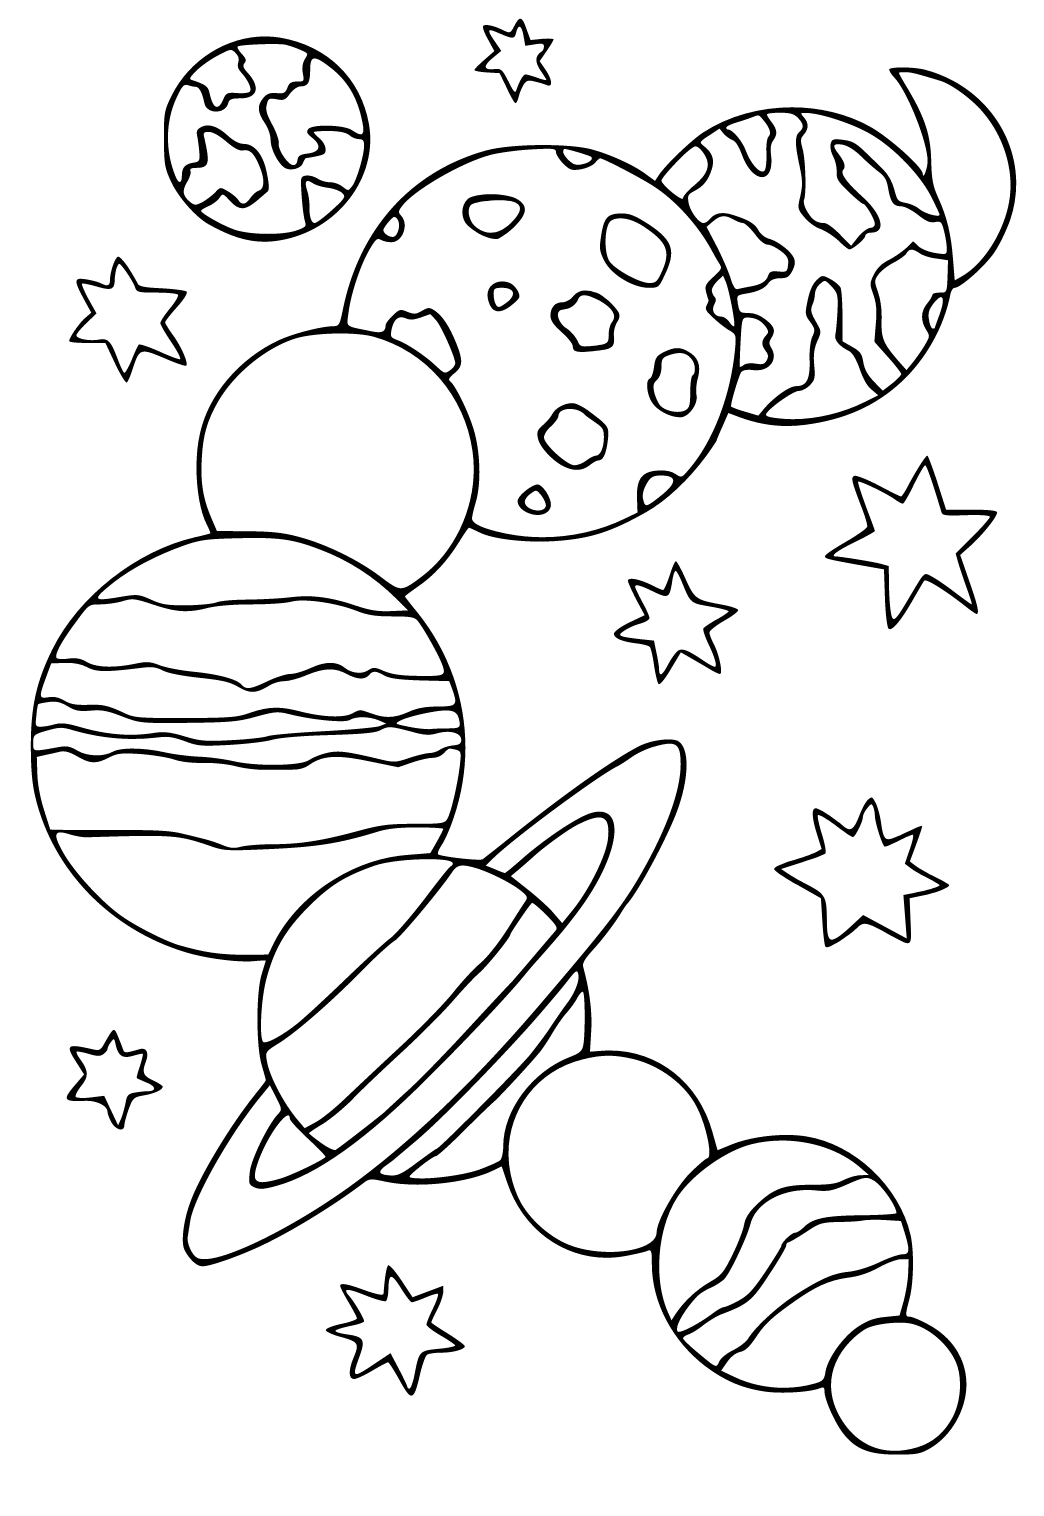 Free printable solar system planets coloring page for adults and kids